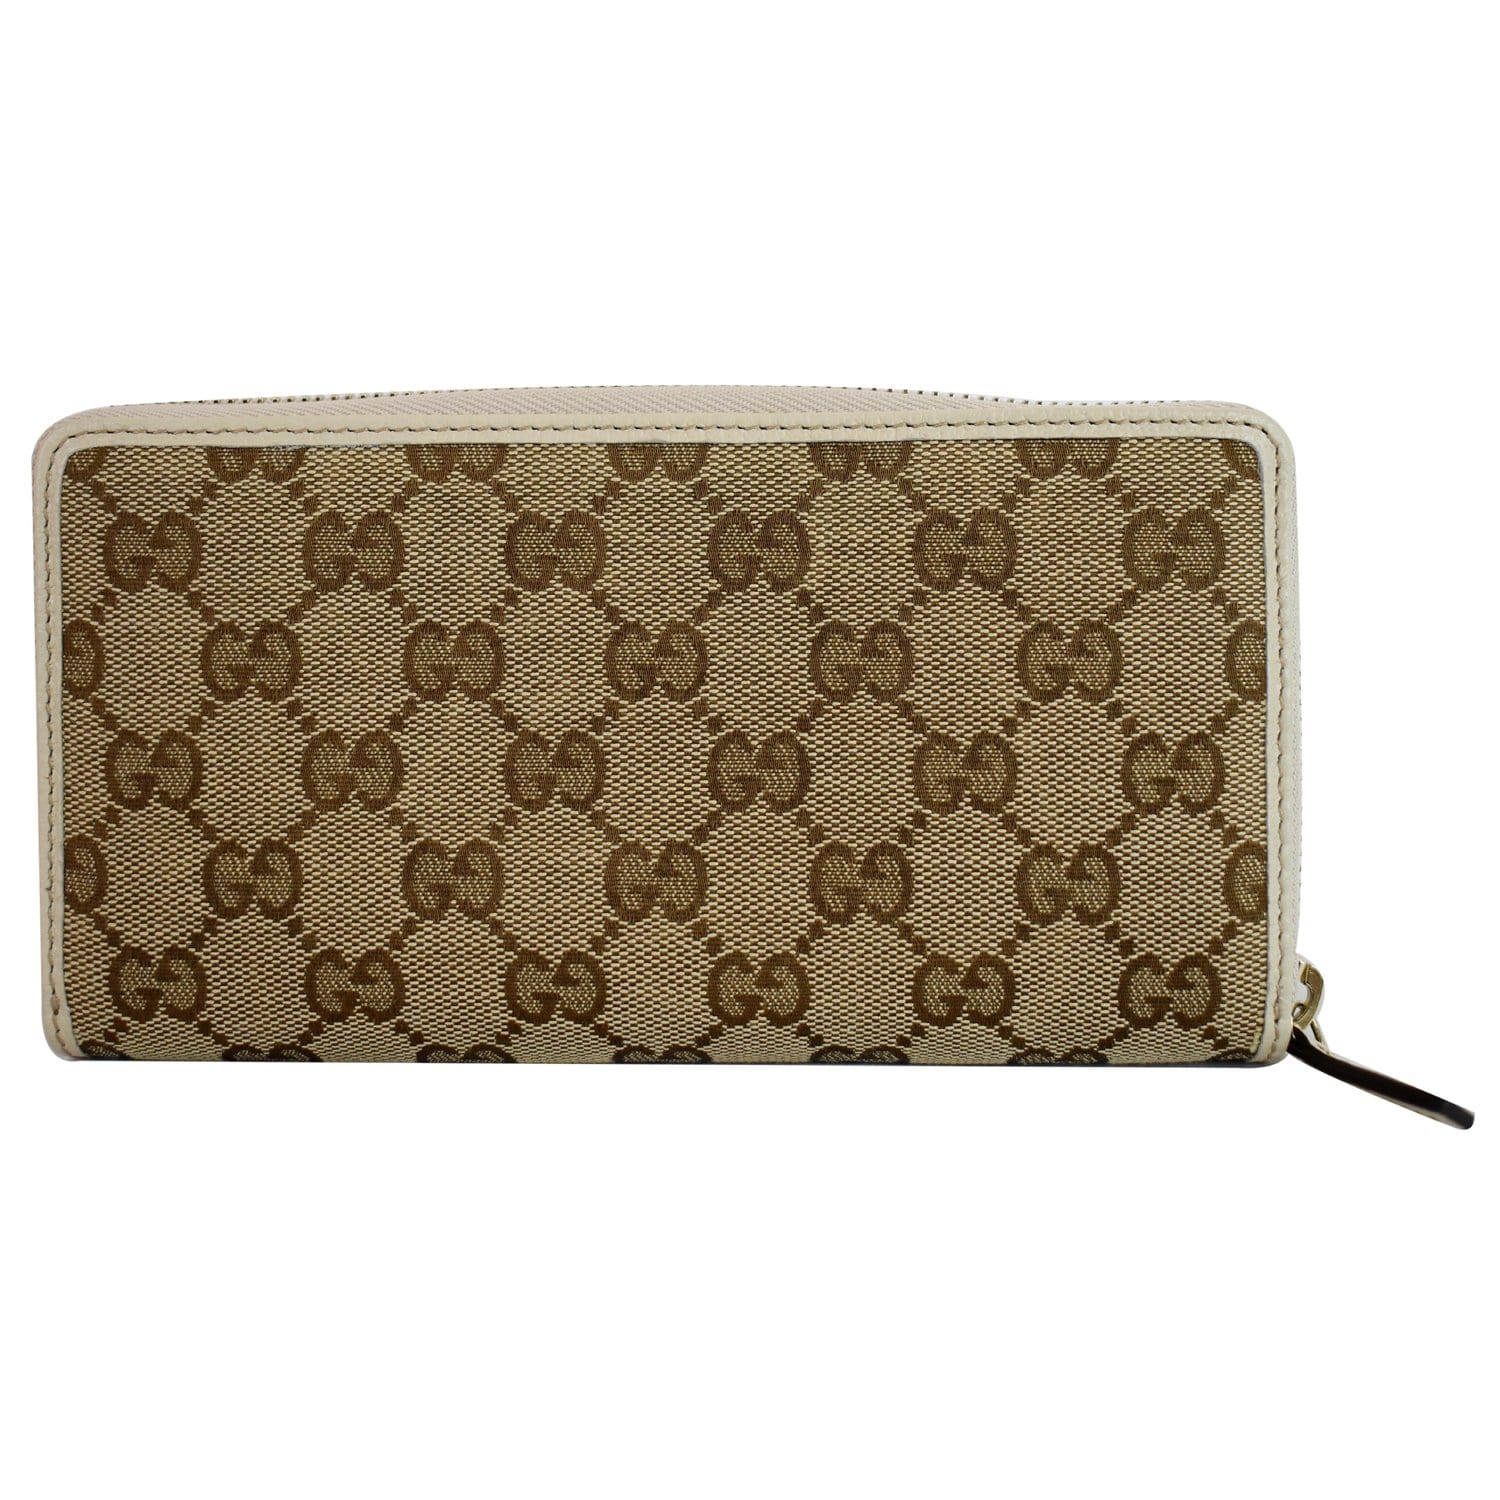 Gucci Ophidia GG Supreme Zip Around Long Wallet